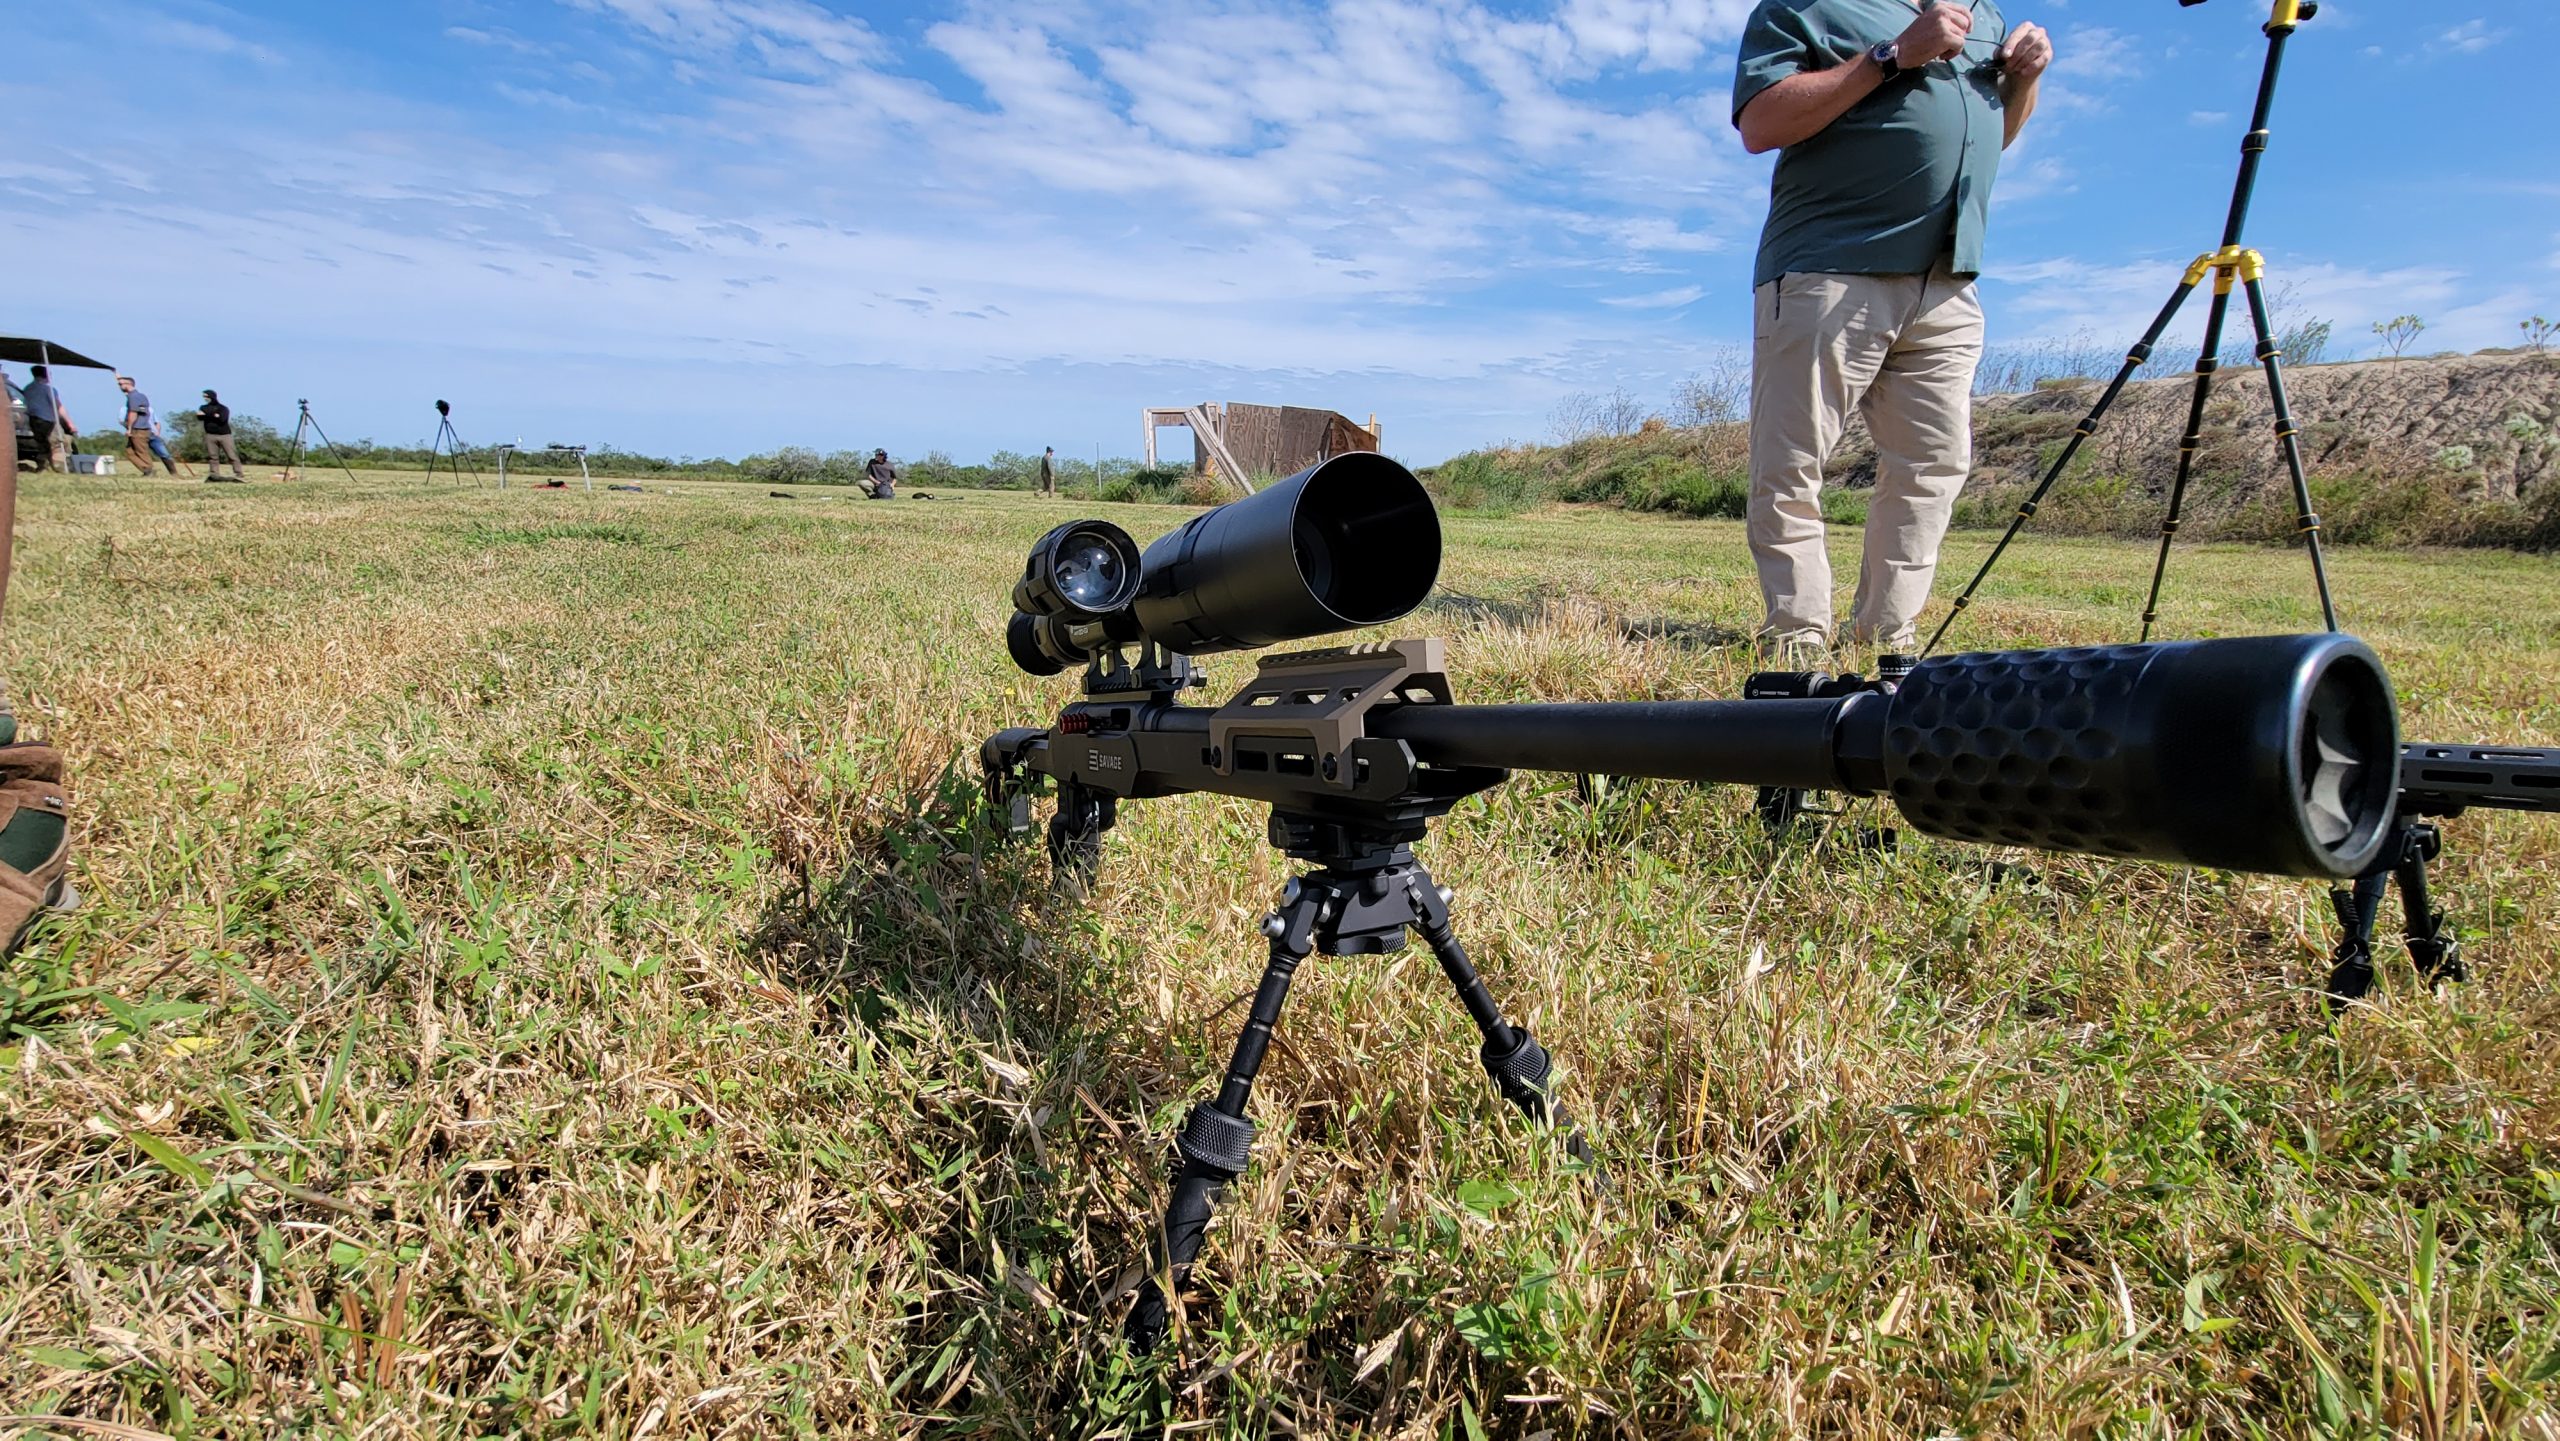 A Field Review of the Savage A22 Precision 22LR Rimfire Rifle